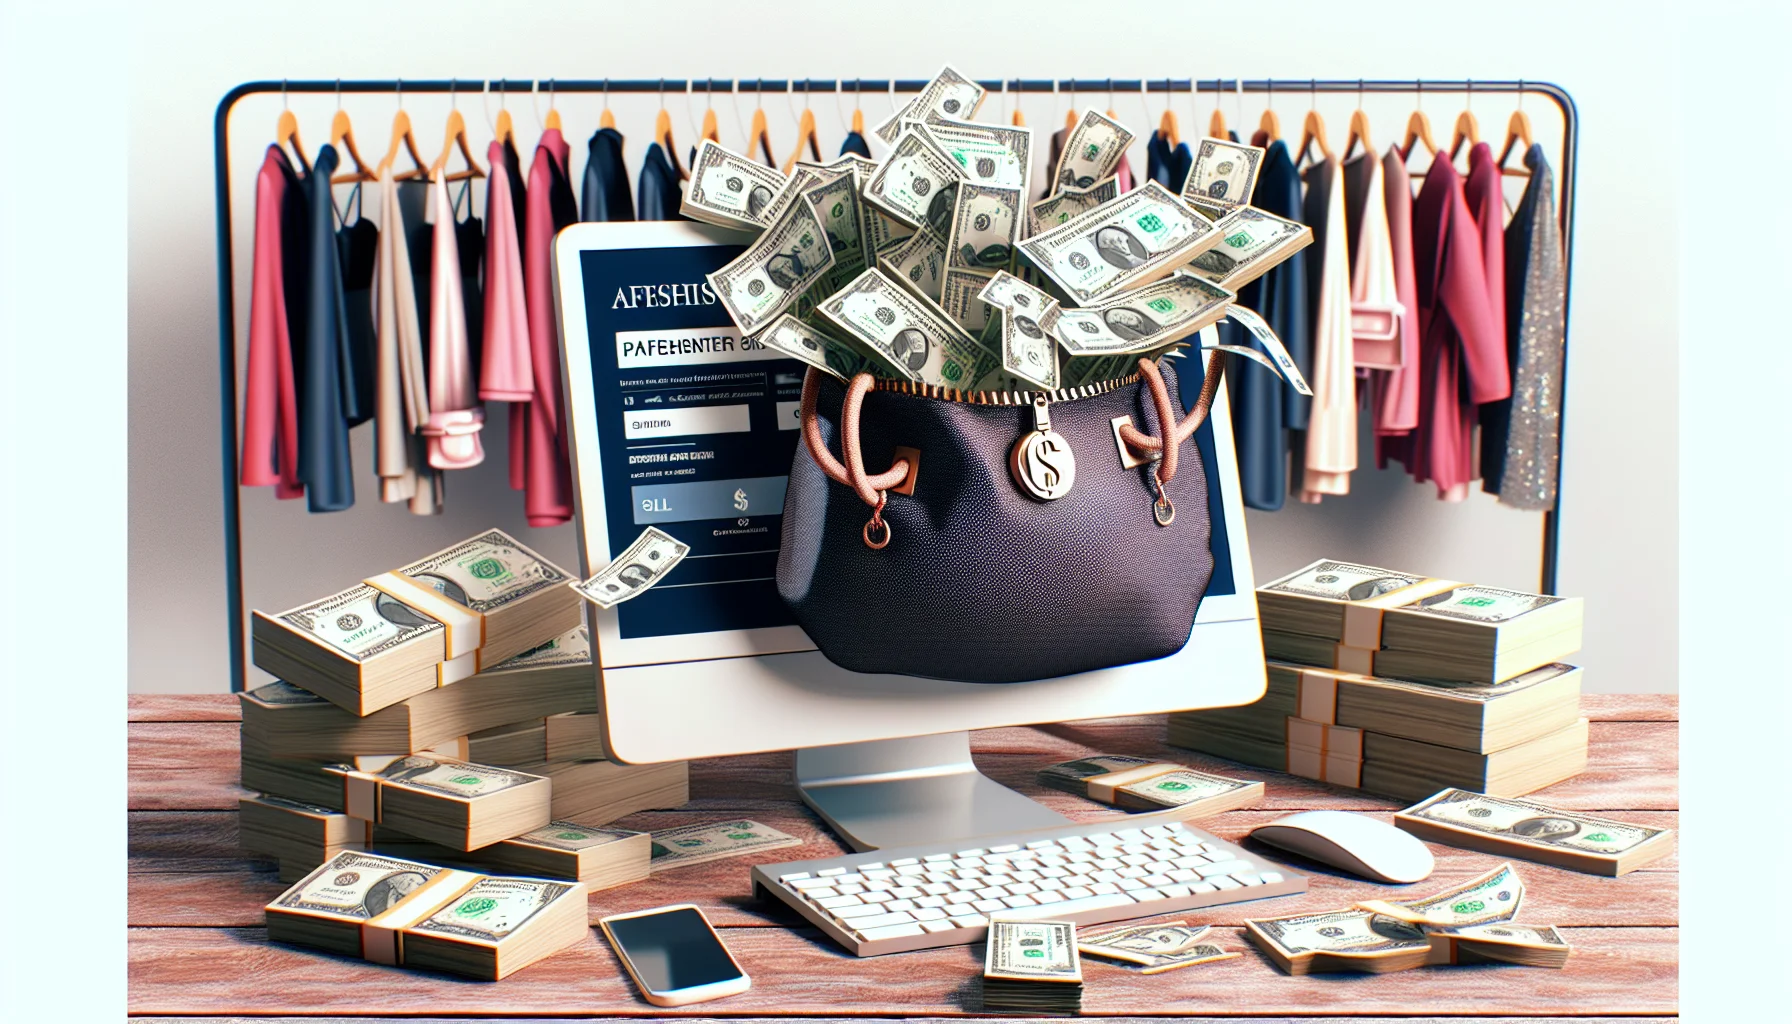 Envision a humorous and realistic scenario representing an unnamed popular fashion designer's affiliate program. Picture this scenario in the context of making money online. Imagine an exaggerated pile of US dollar bills spilling out from a computer screen, and a stylish bag carrying the designer's logo next to it, indicating profits from the program. On the screen, also show various fashion items being sold online. The overall setting should be enticing and portray the benefits of online money-making.